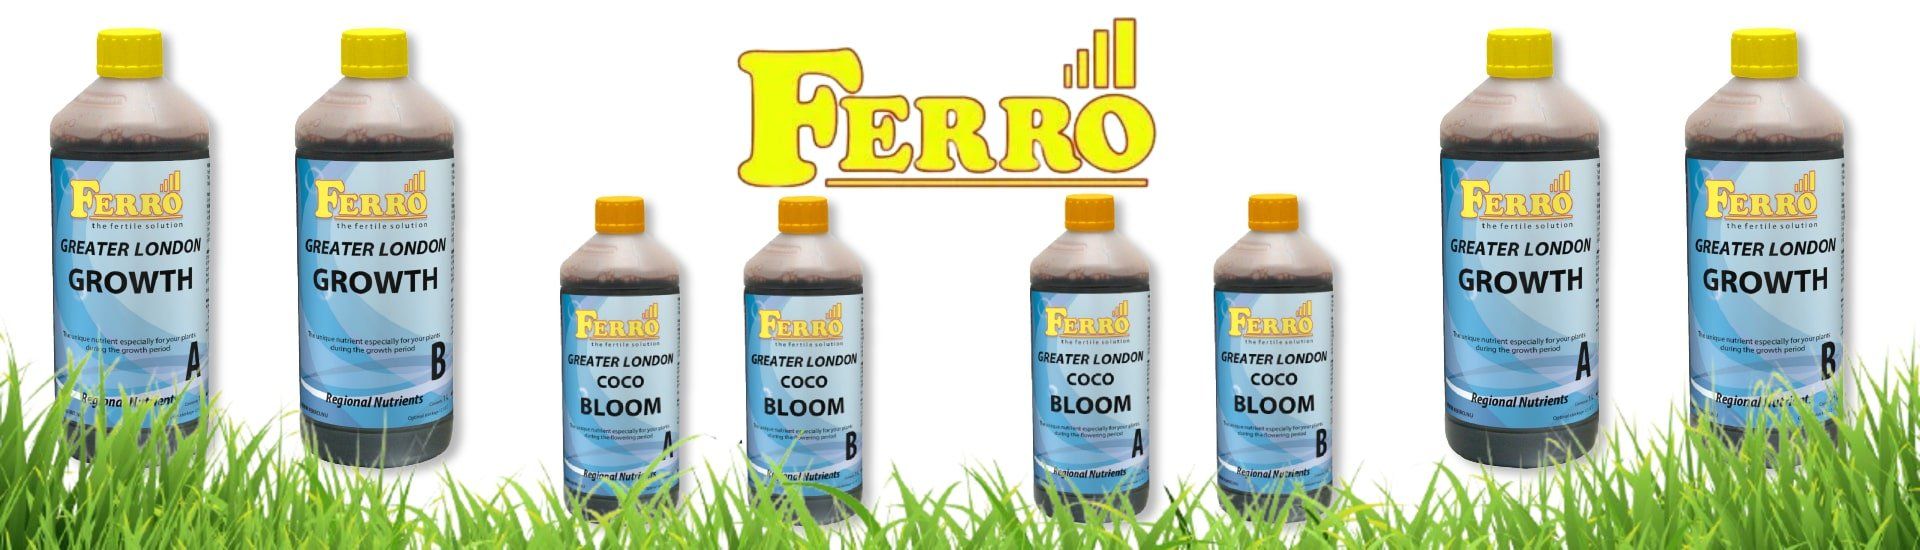 Ferro offers a wide and comprehensive range of nutrient concentrates, plant enhancers, pH regulators, bloom boosters and cleaners, along with a number of related products.